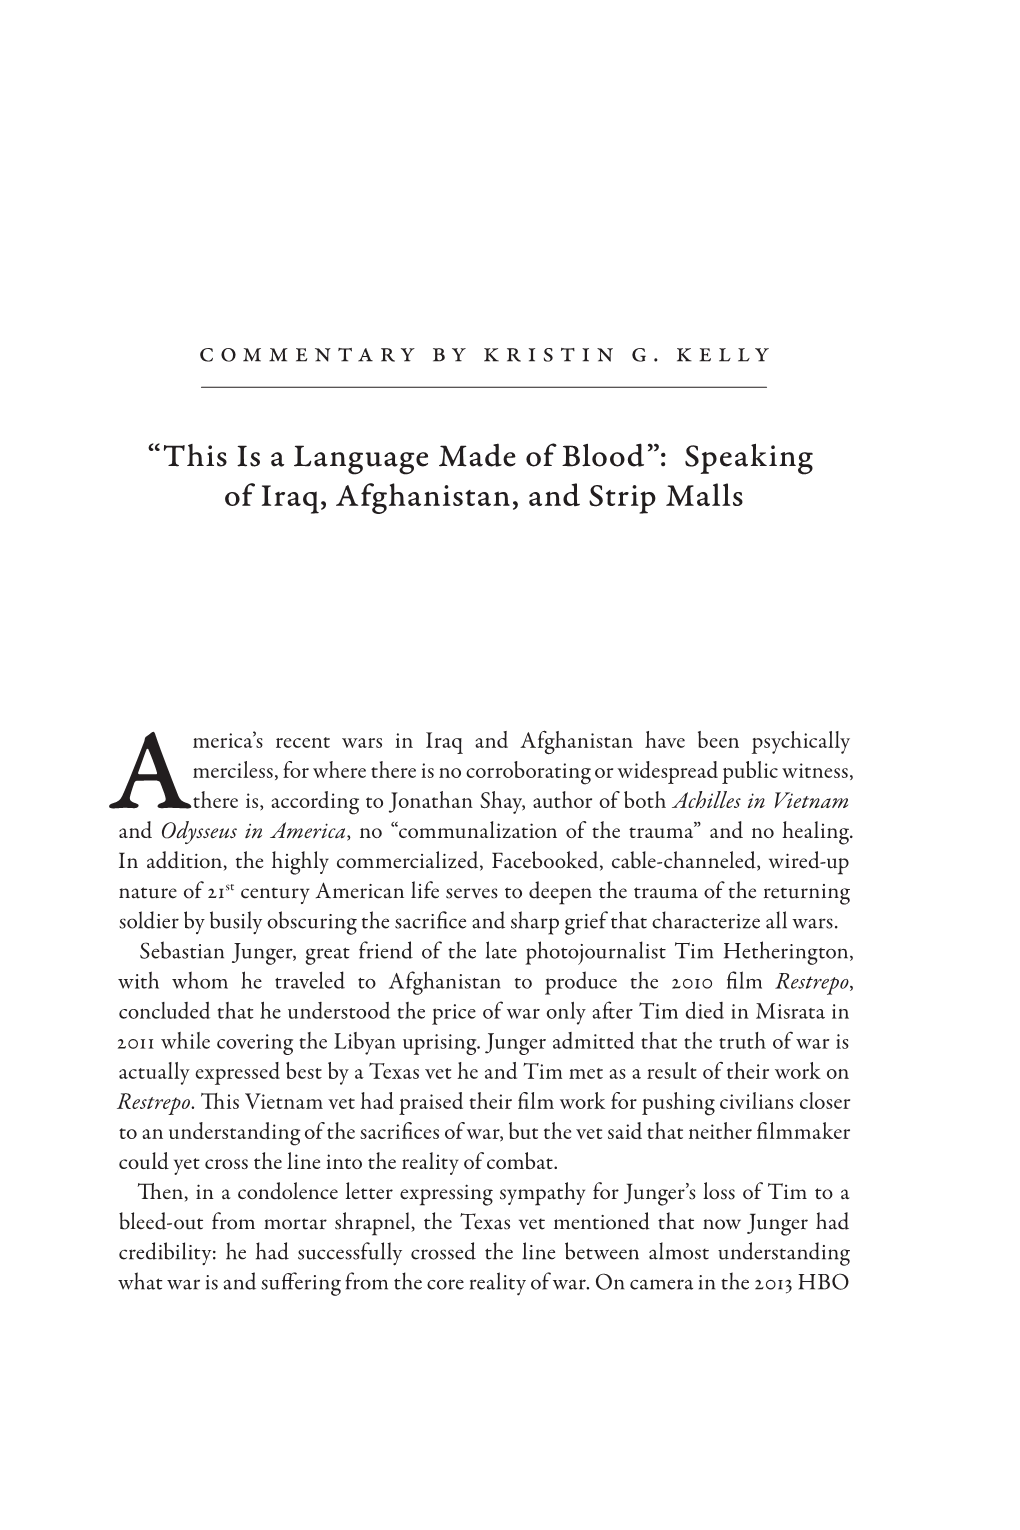 “This Is a Language Made of Blood”: Speaking of Iraq, Afghanistan, and Strip Malls